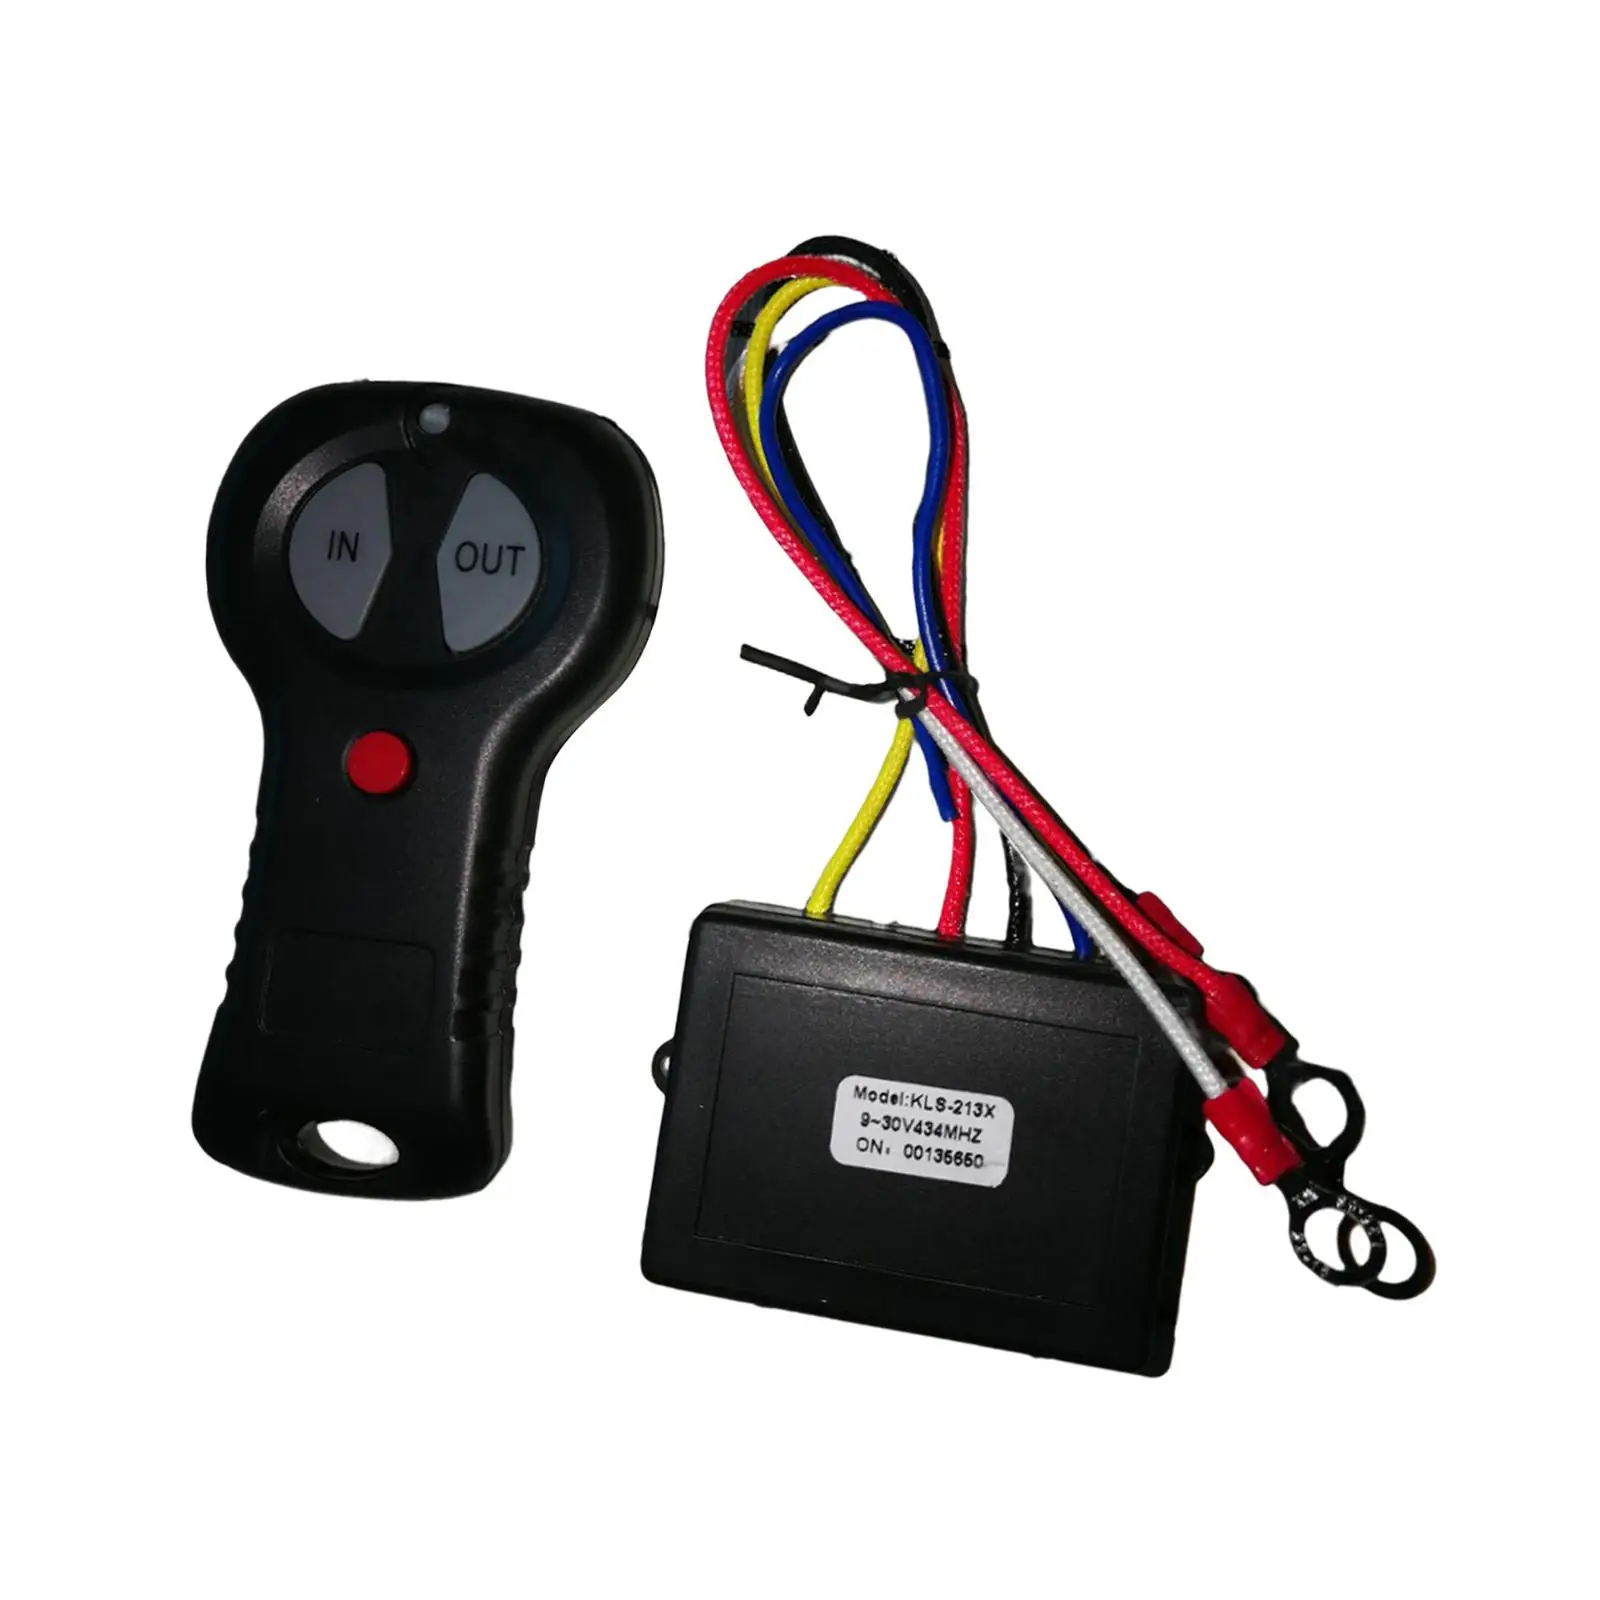 Winch Remote Control Handset switches Truck Winch Waterproof for SUV ATV Auto